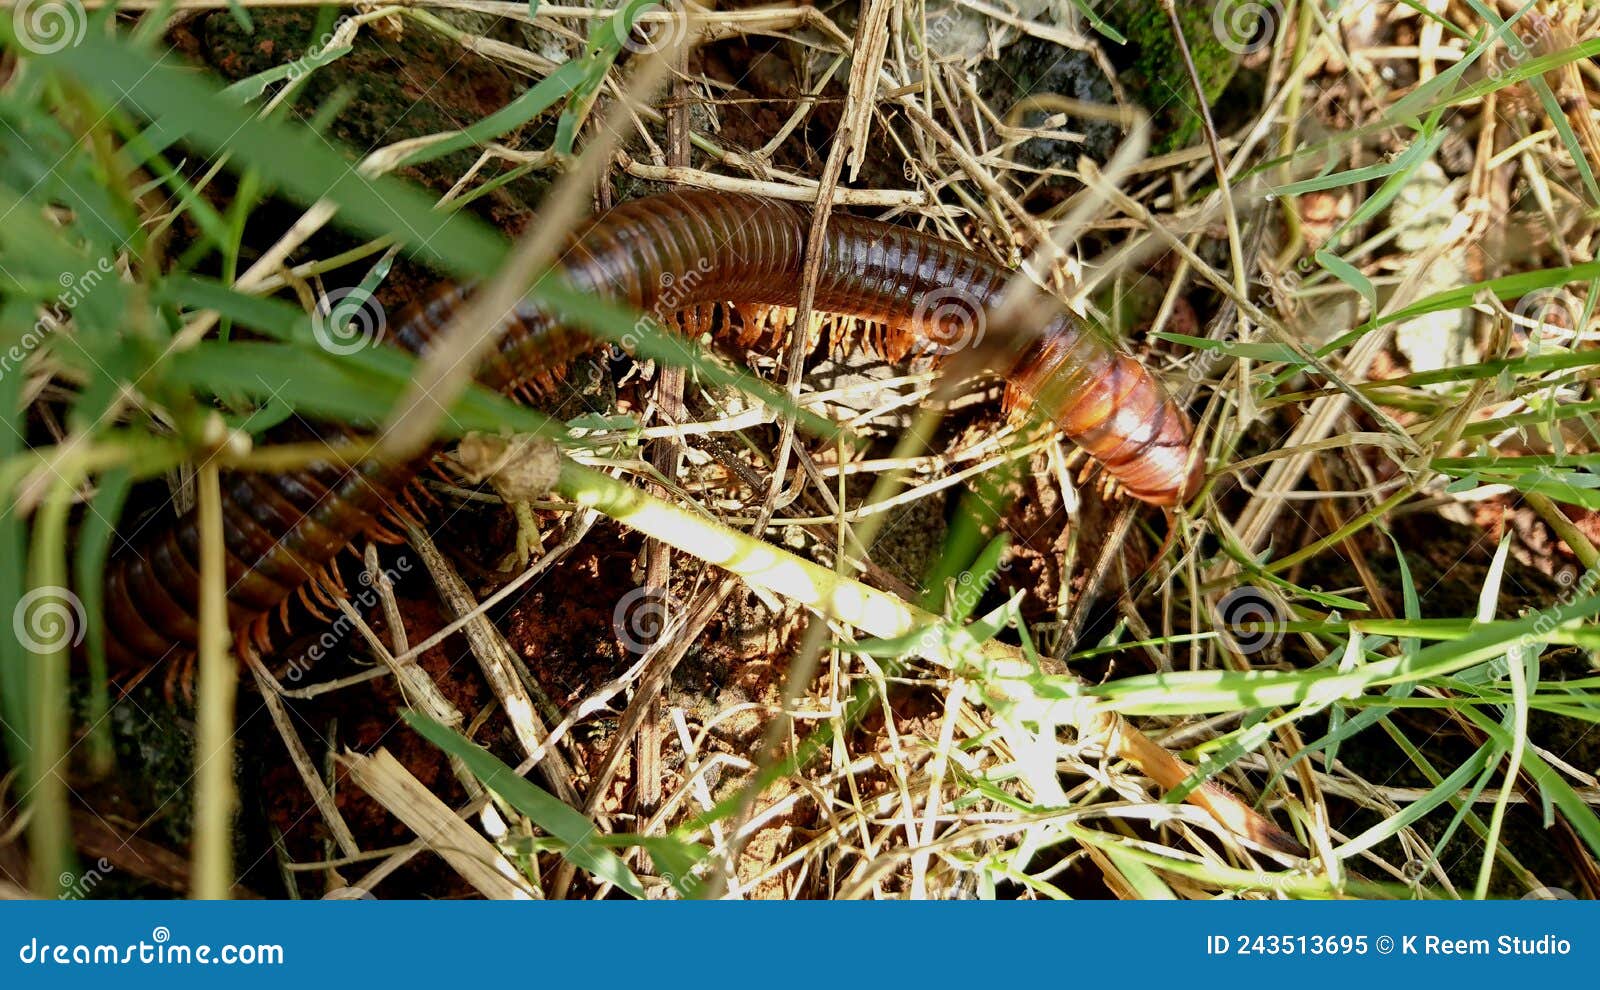 Millipedes on Grassy Ground, Nature Background Stock Image - Image of  circled, millipede: 243513695